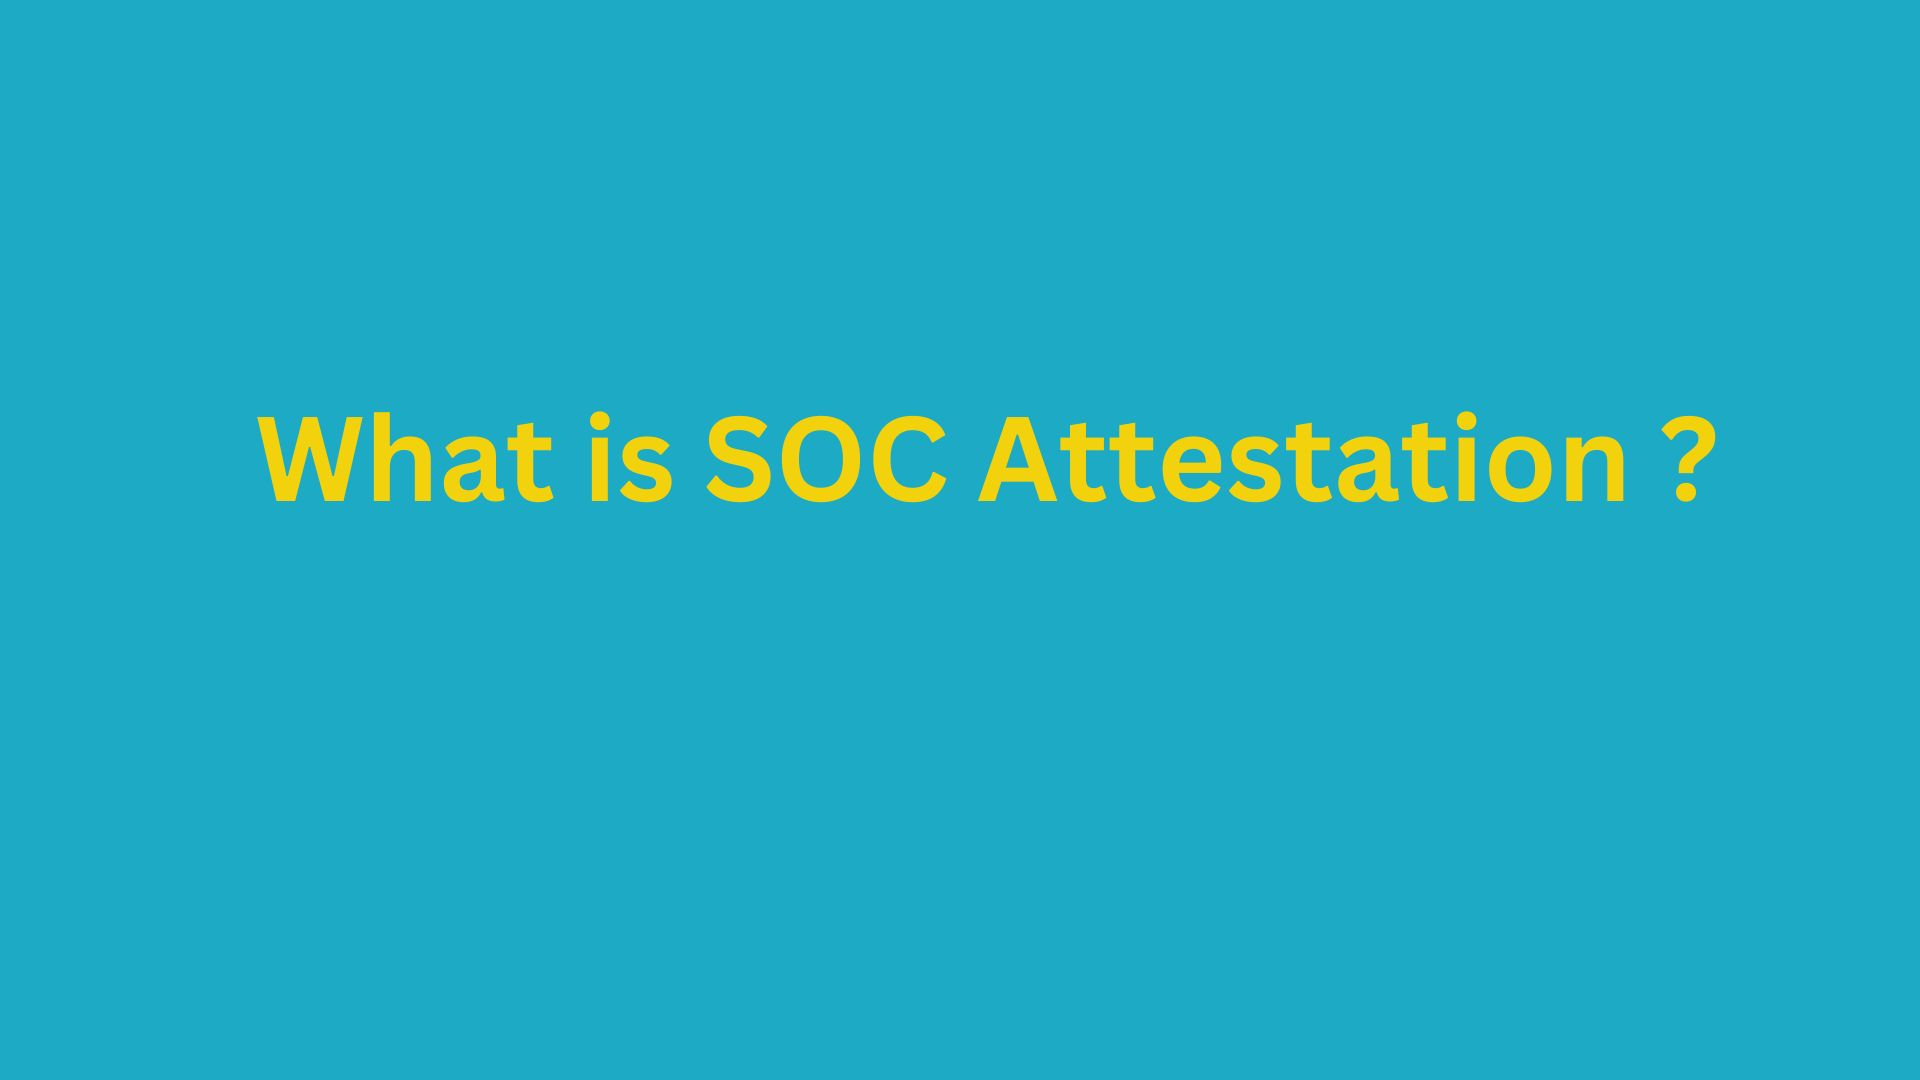 What is SOC Attestation?